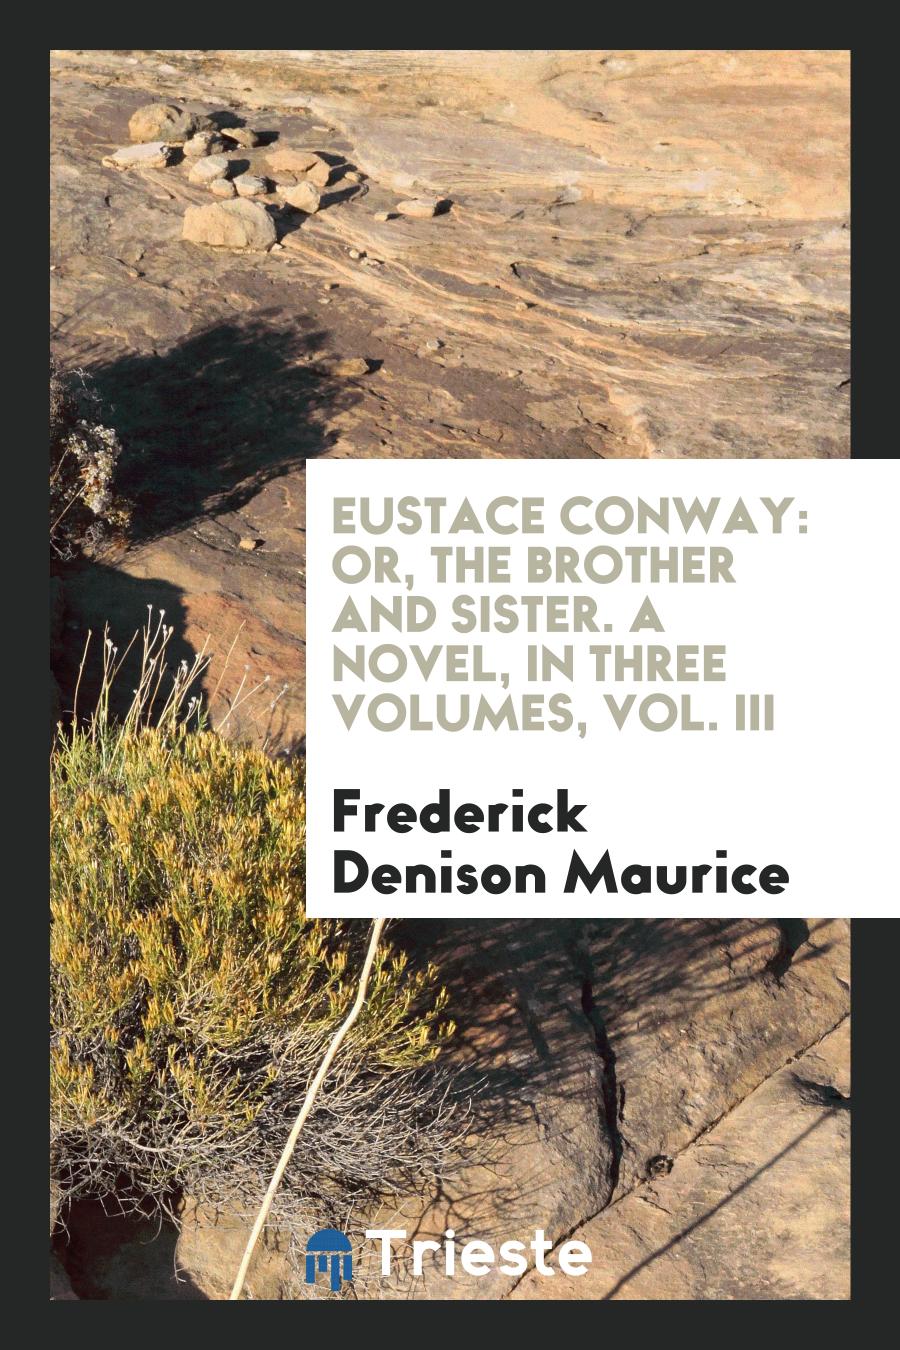 Eustace Conway: Or, The Brother and Sister. A Novel, in Three Volumes, Vol. III